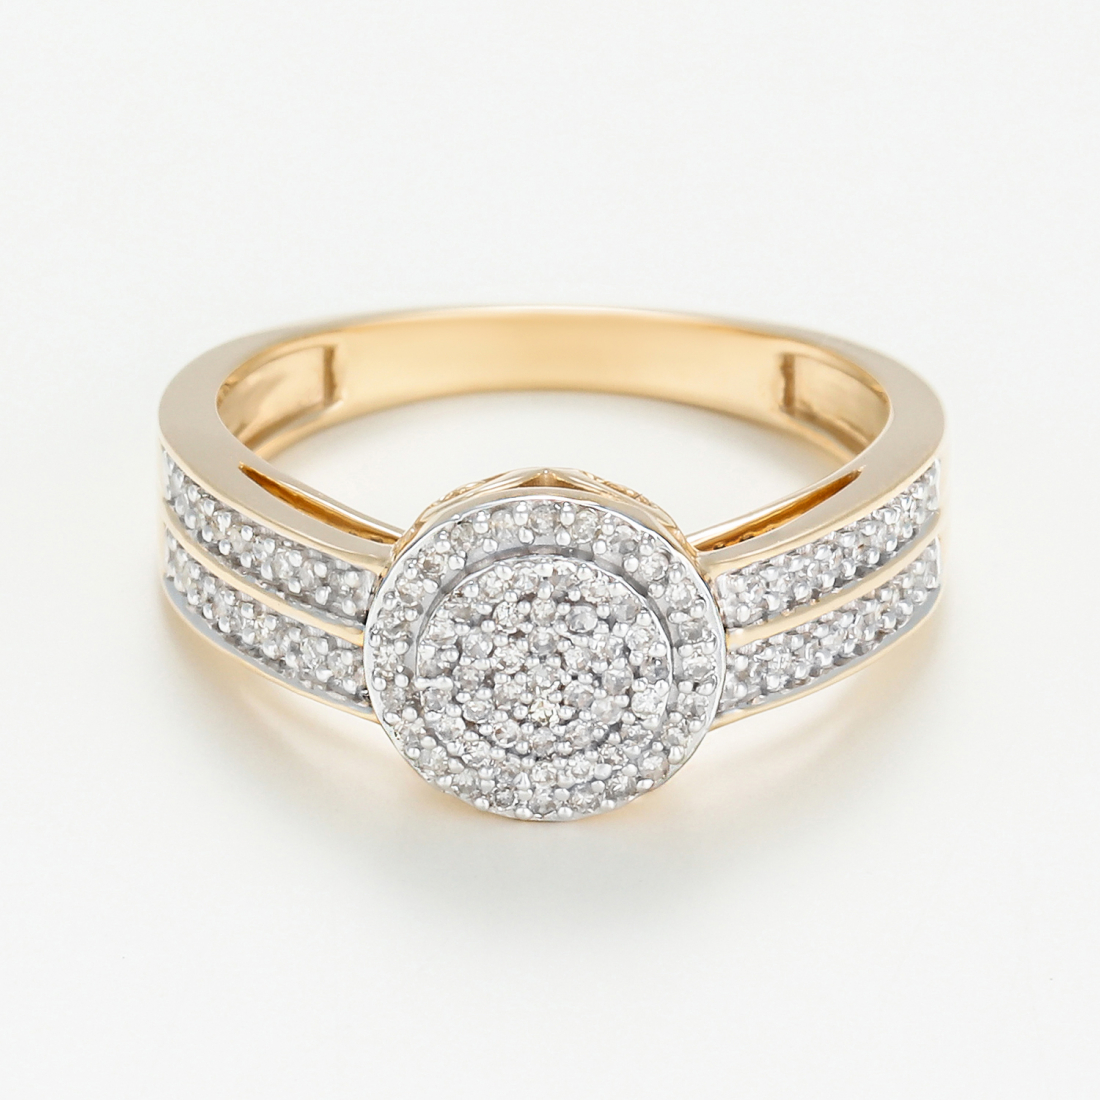 Women's 'First Love' Ring